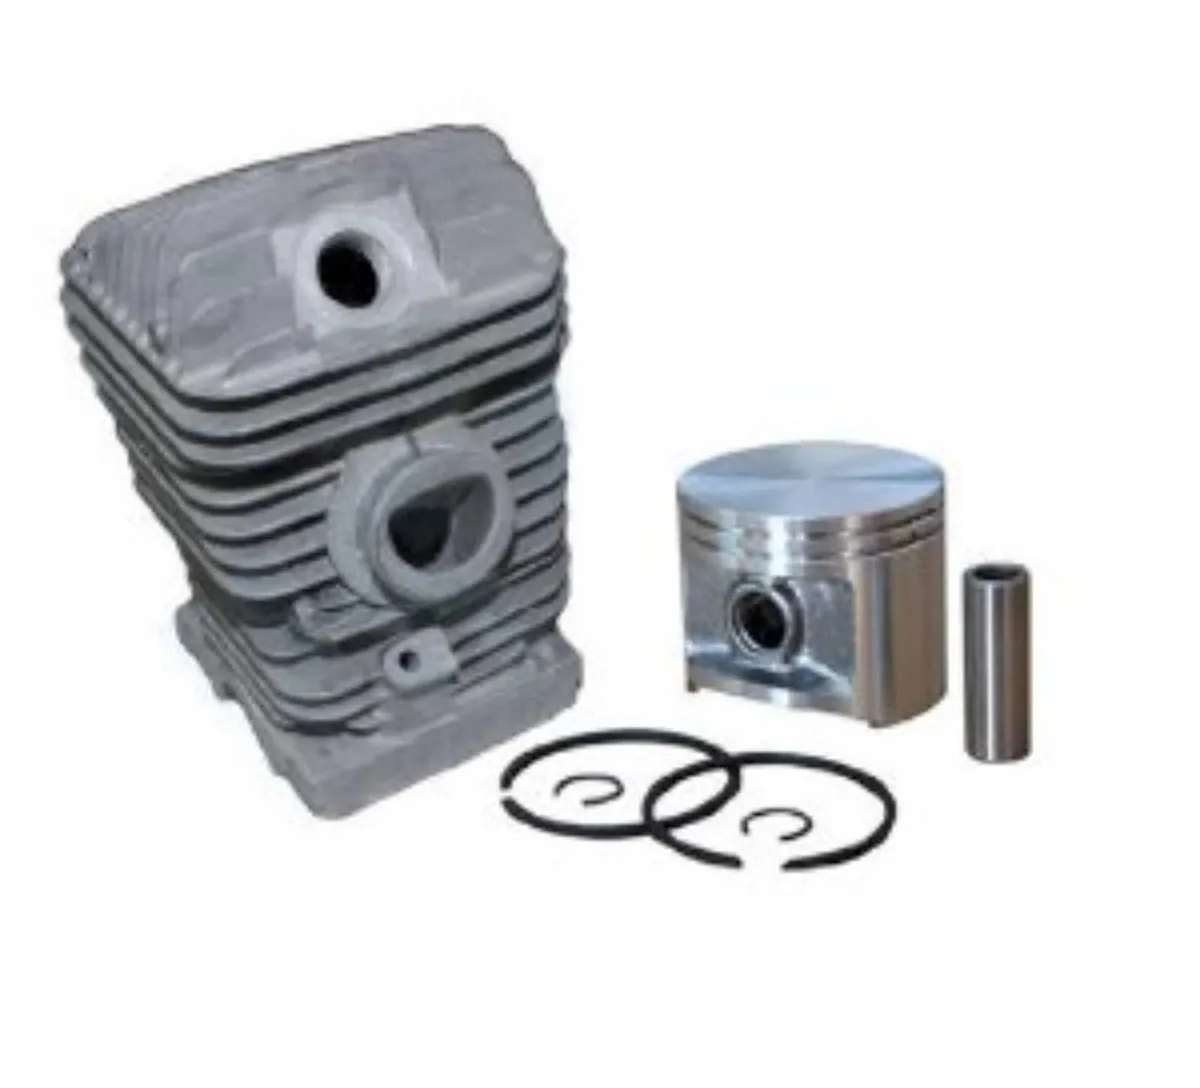 Chainsaw Cylinder & Pistons - FREE Delivery - Image 1